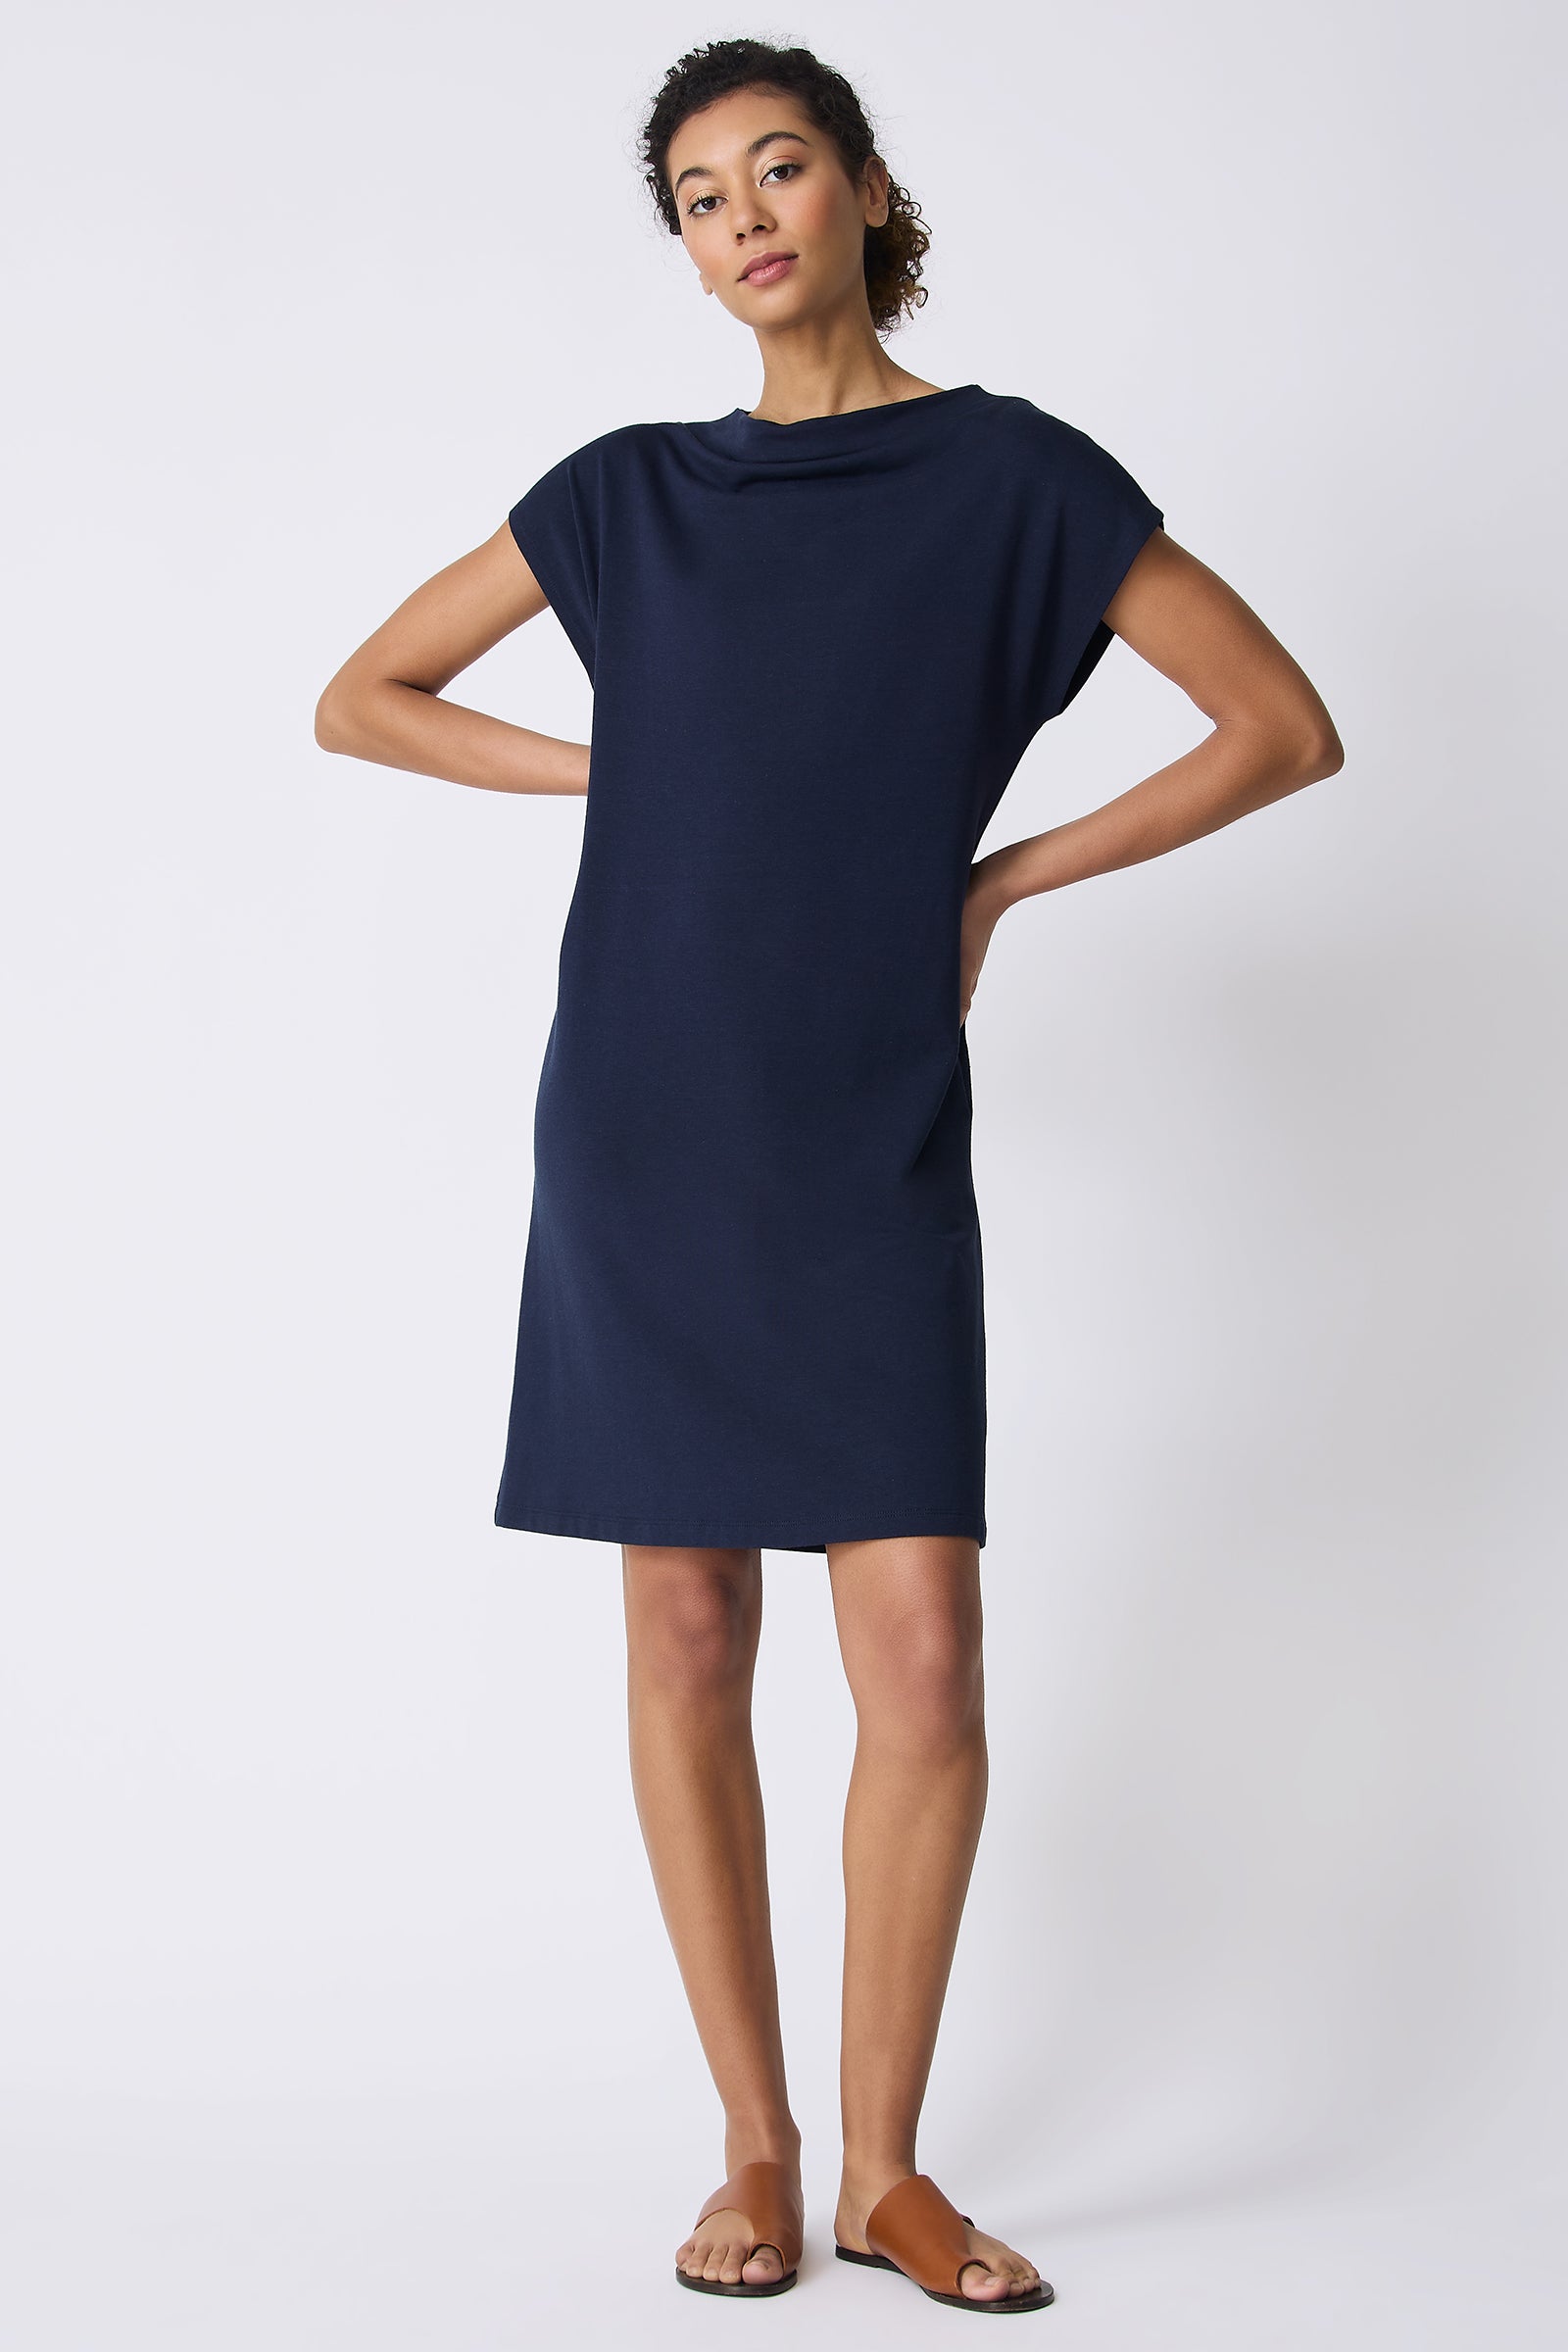 Kal Rieman Luca Cowl Dress in Navy on model with hands on hips full front view